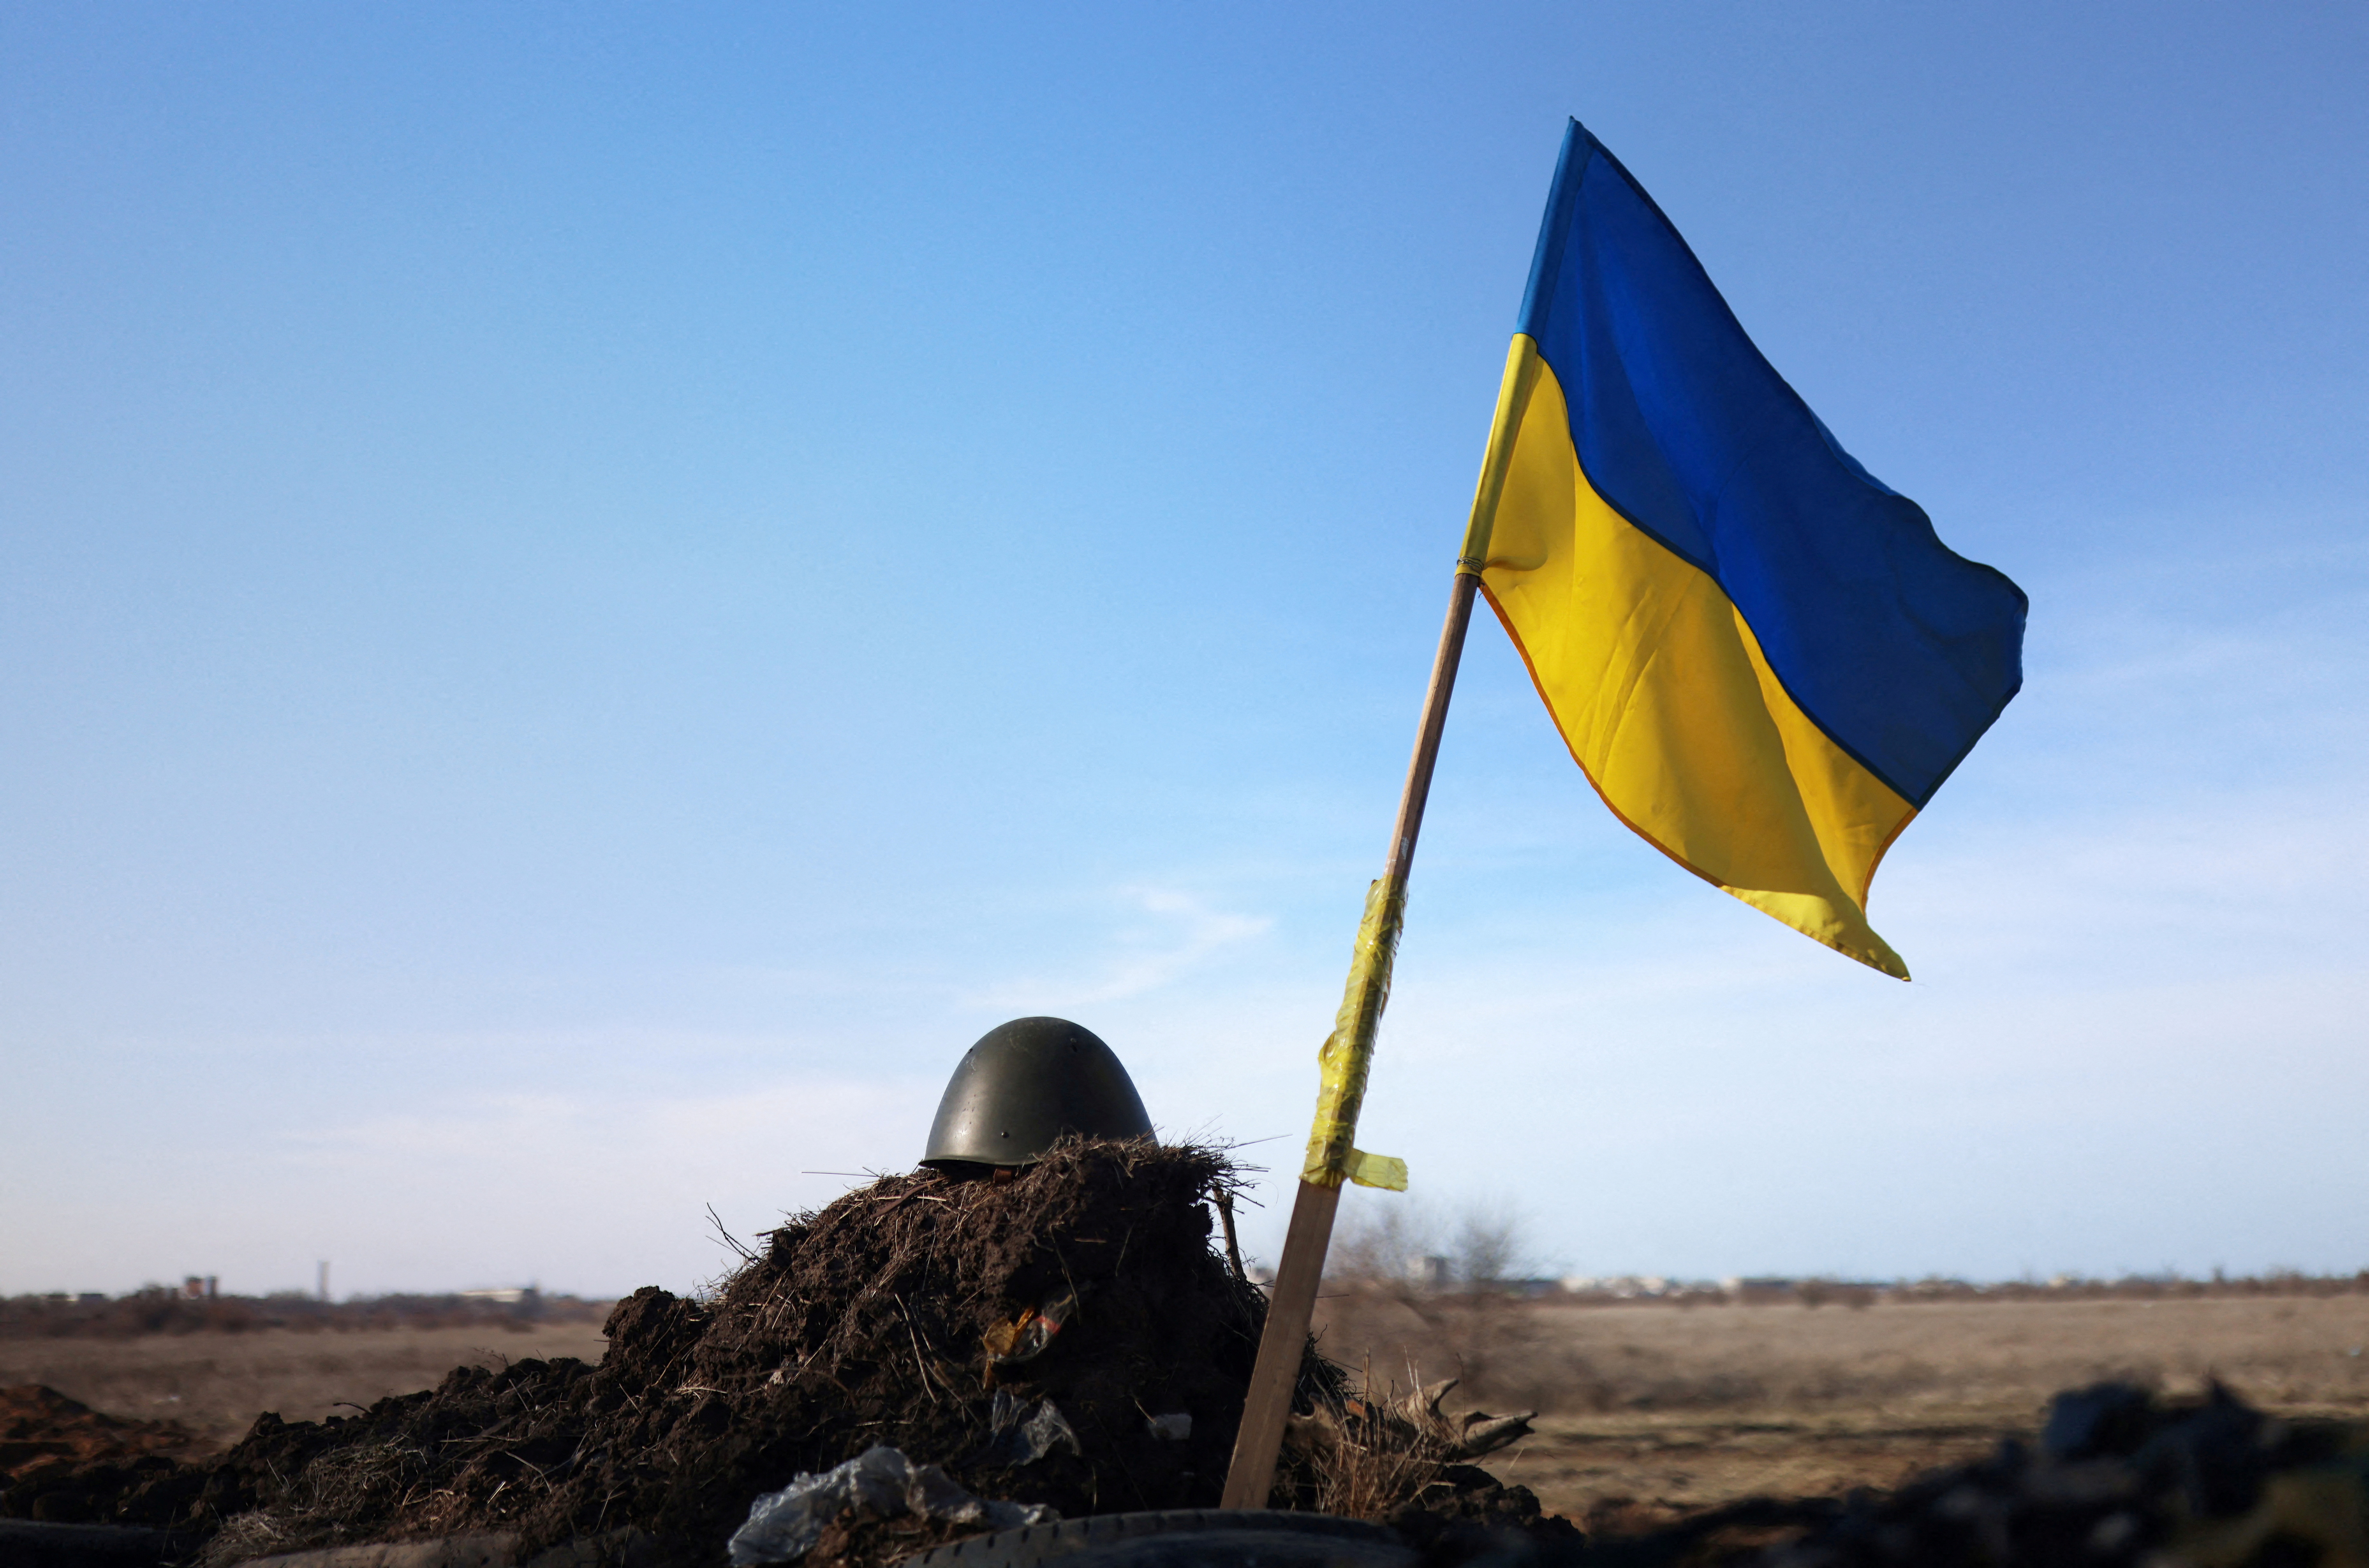 A Ukrainian flag and a helmet of a soldier are pictured at checkpoint, as Russia's invasion of Ukraine continues, in Mykolaiv